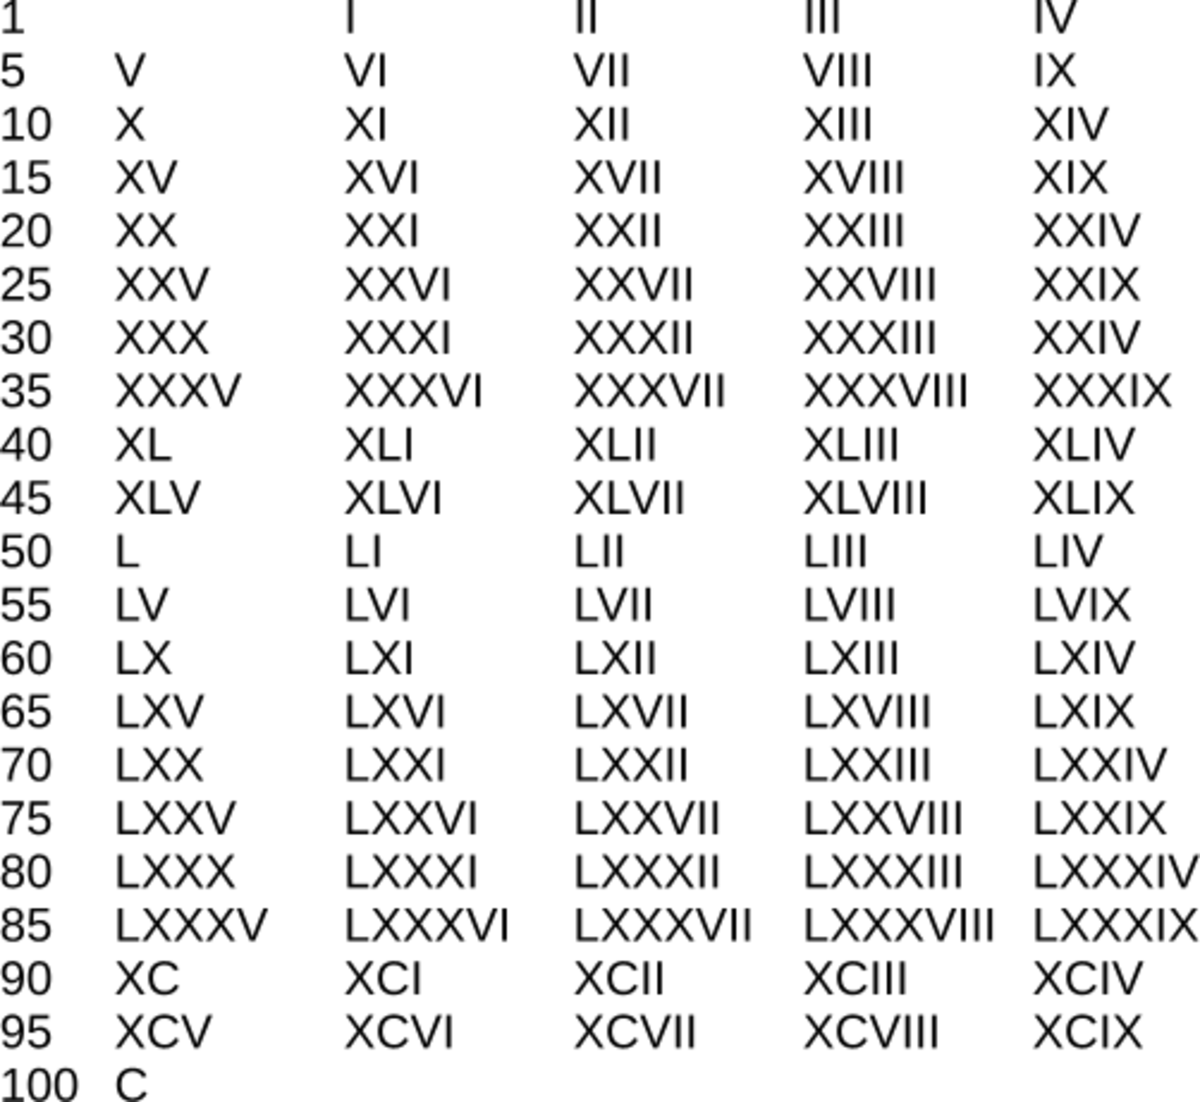 roman-numeration-system-and-common-numerals-hubpages